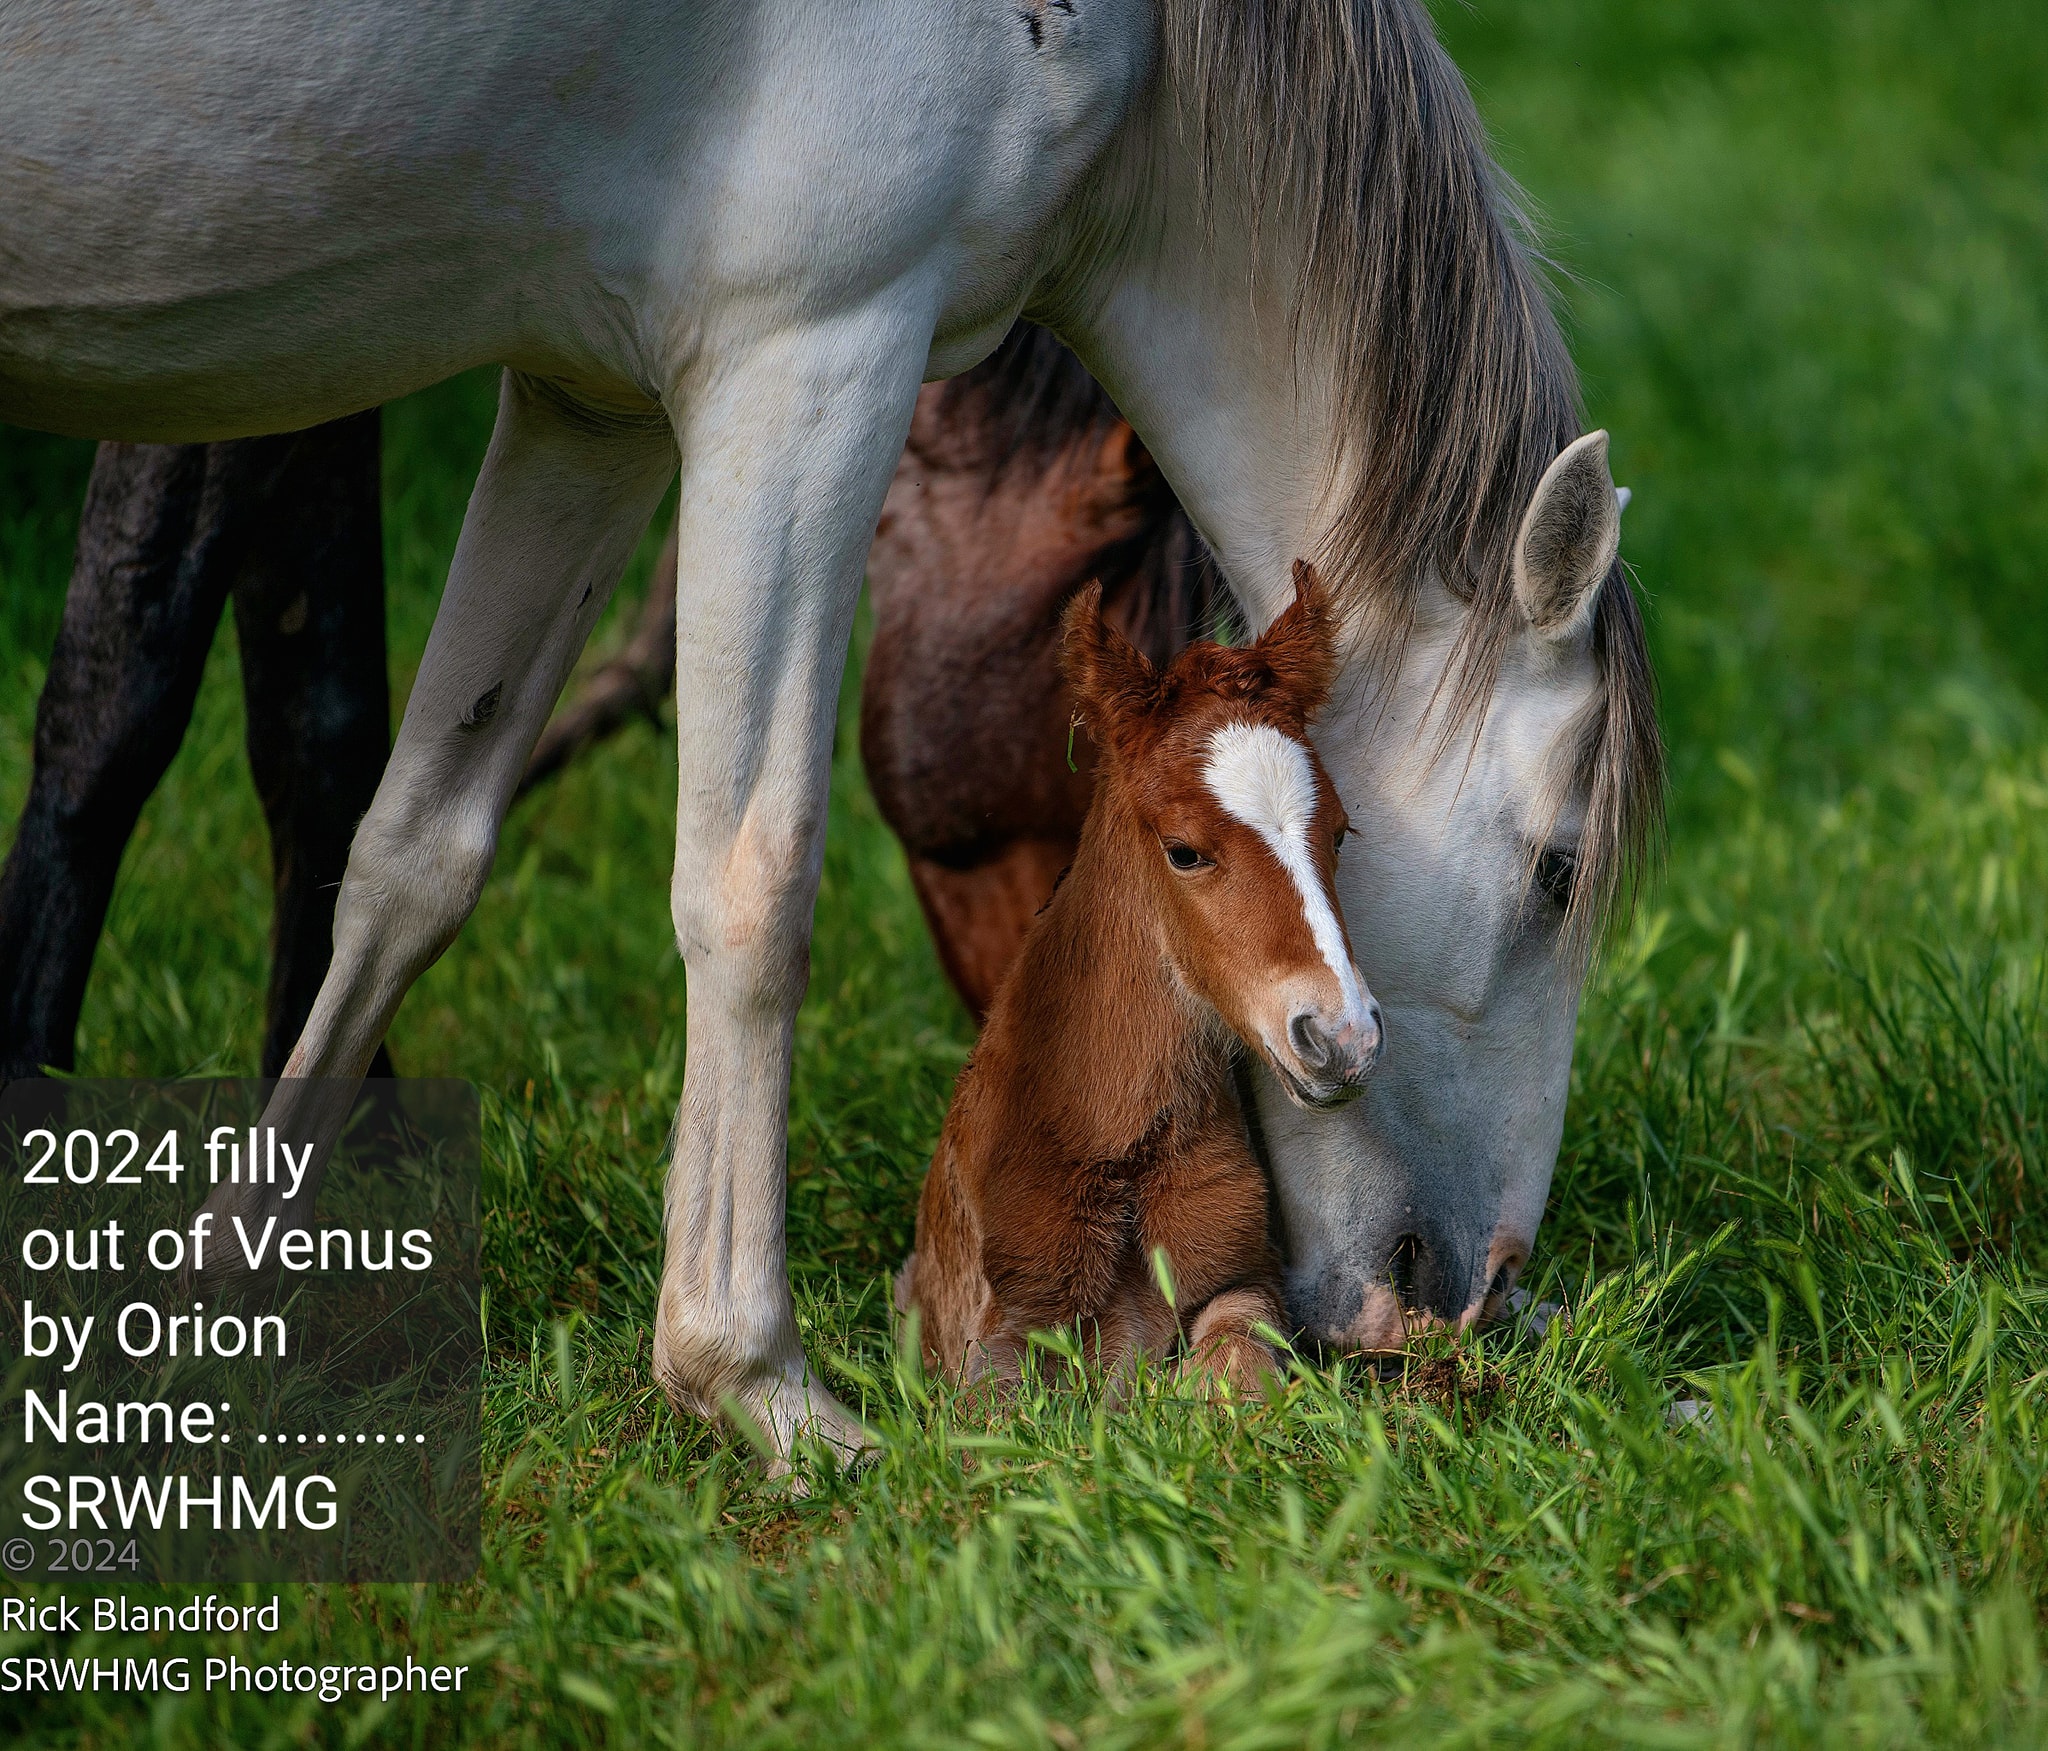 Venus’ and Orion’s filly has been named!